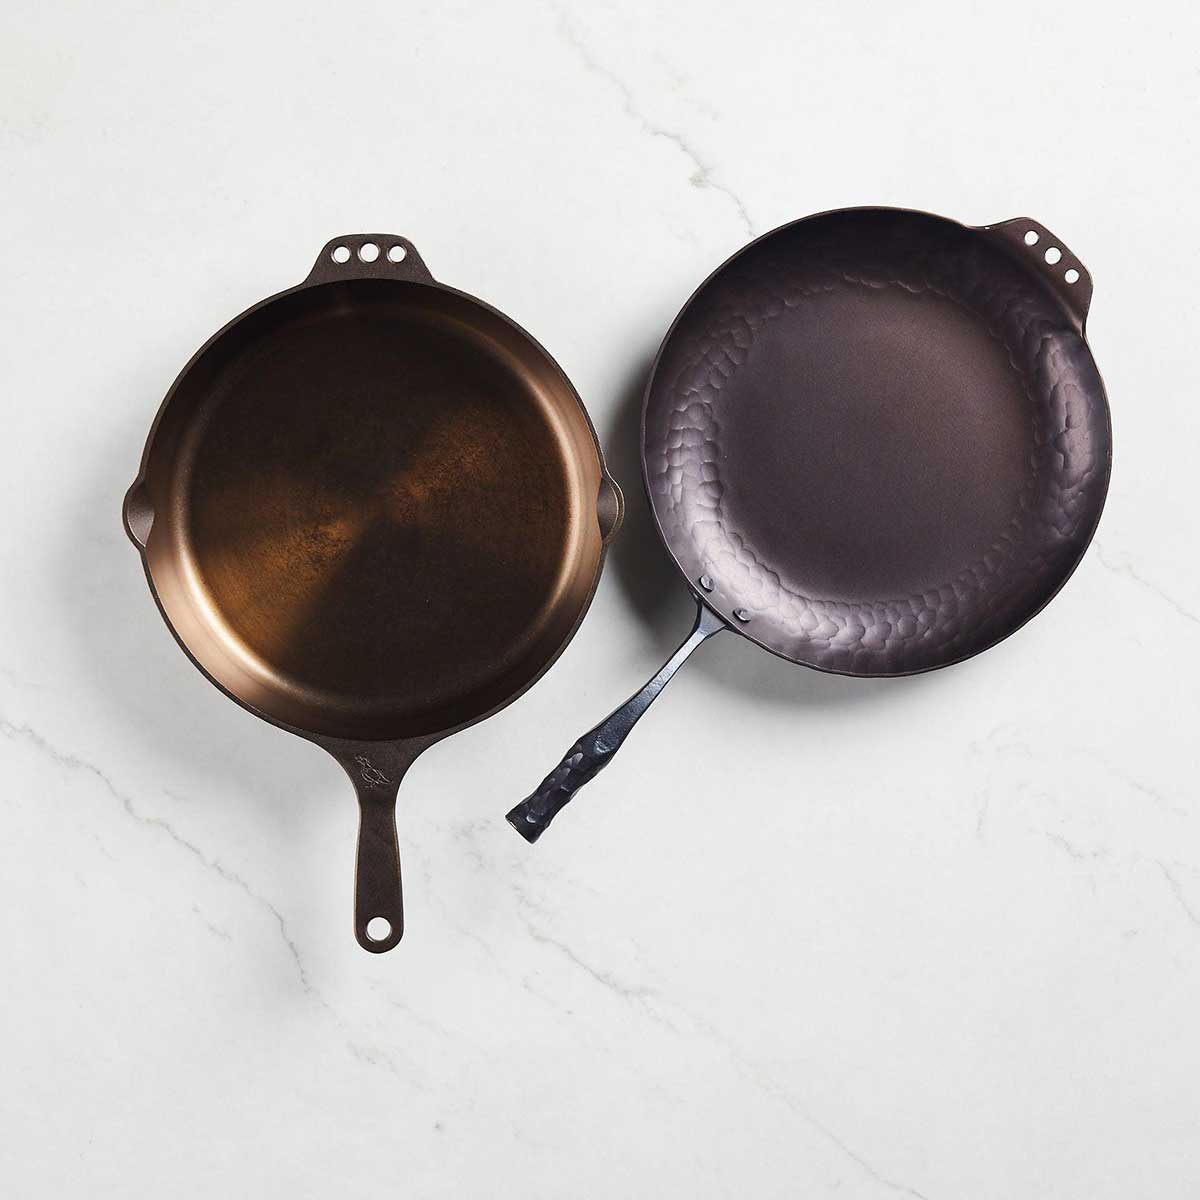 The Perfect Pair – Smithey Ironware